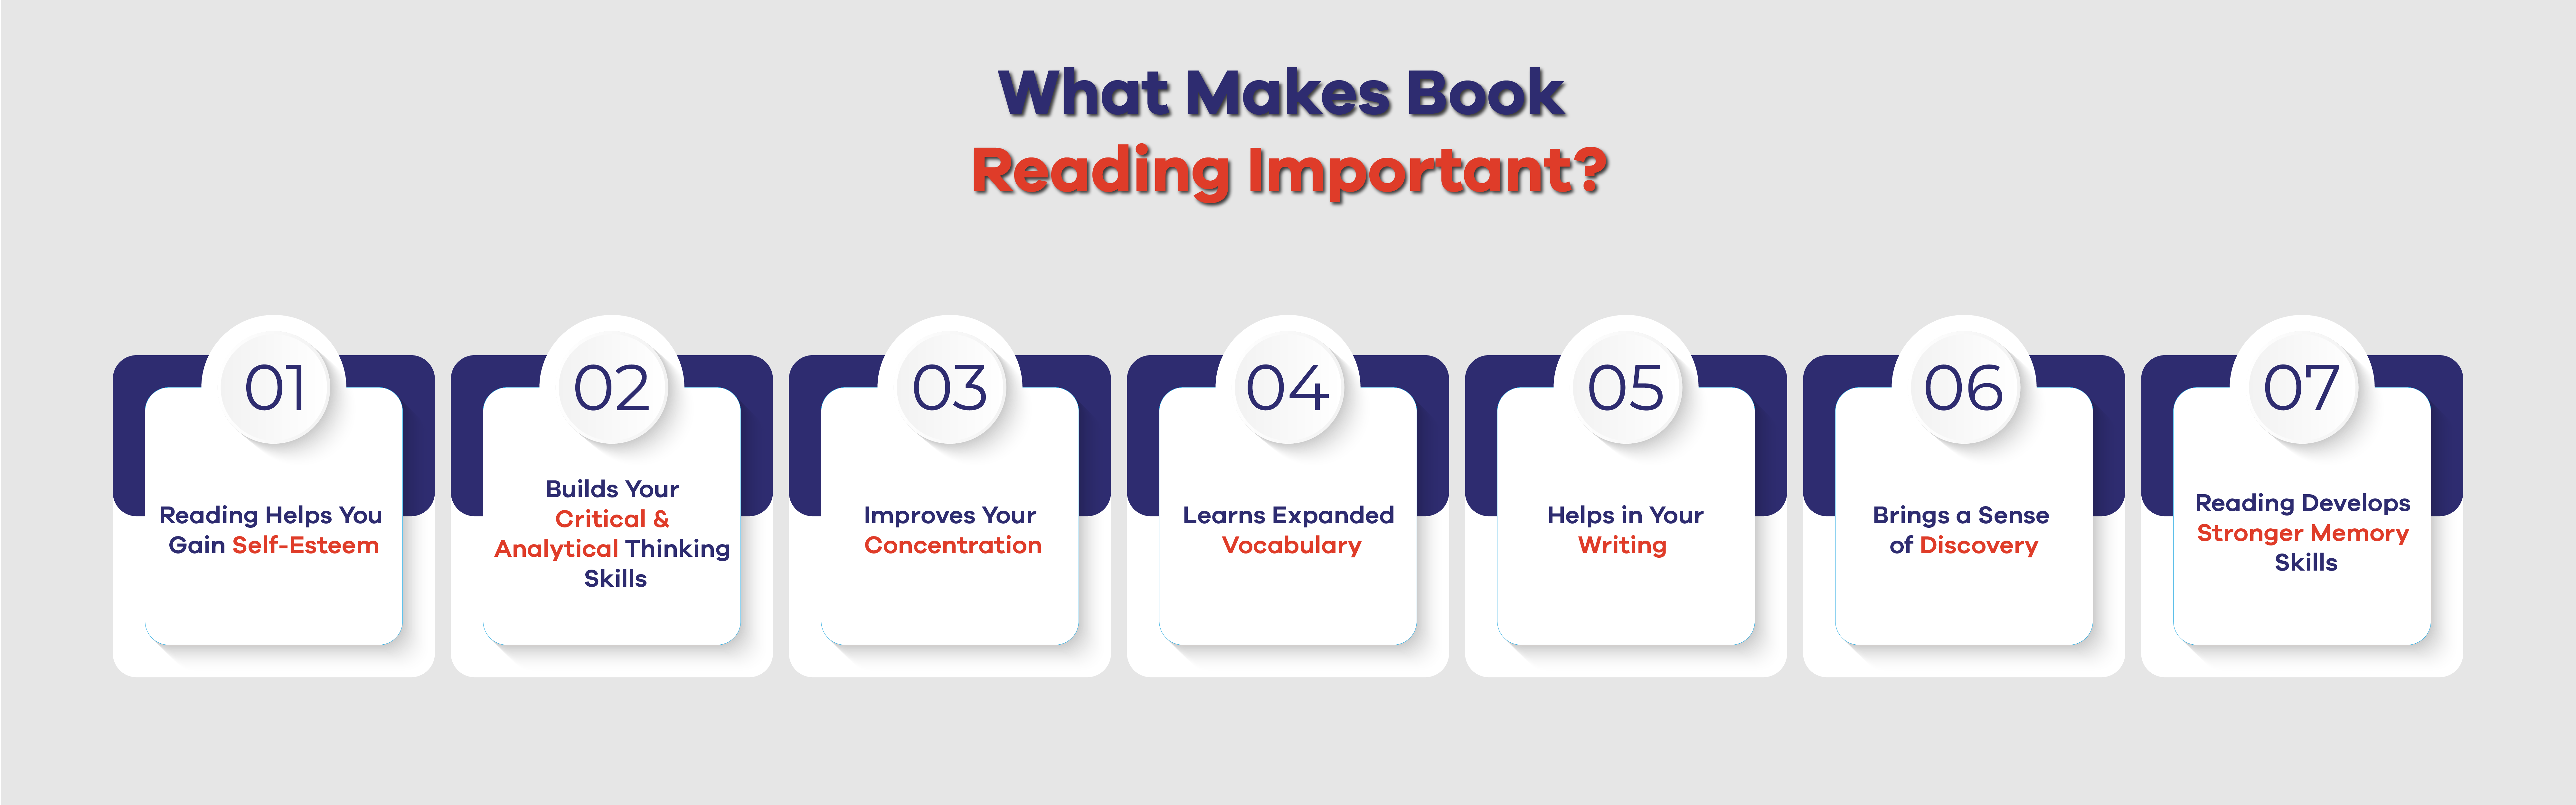 What Makes Book Reading Important? 